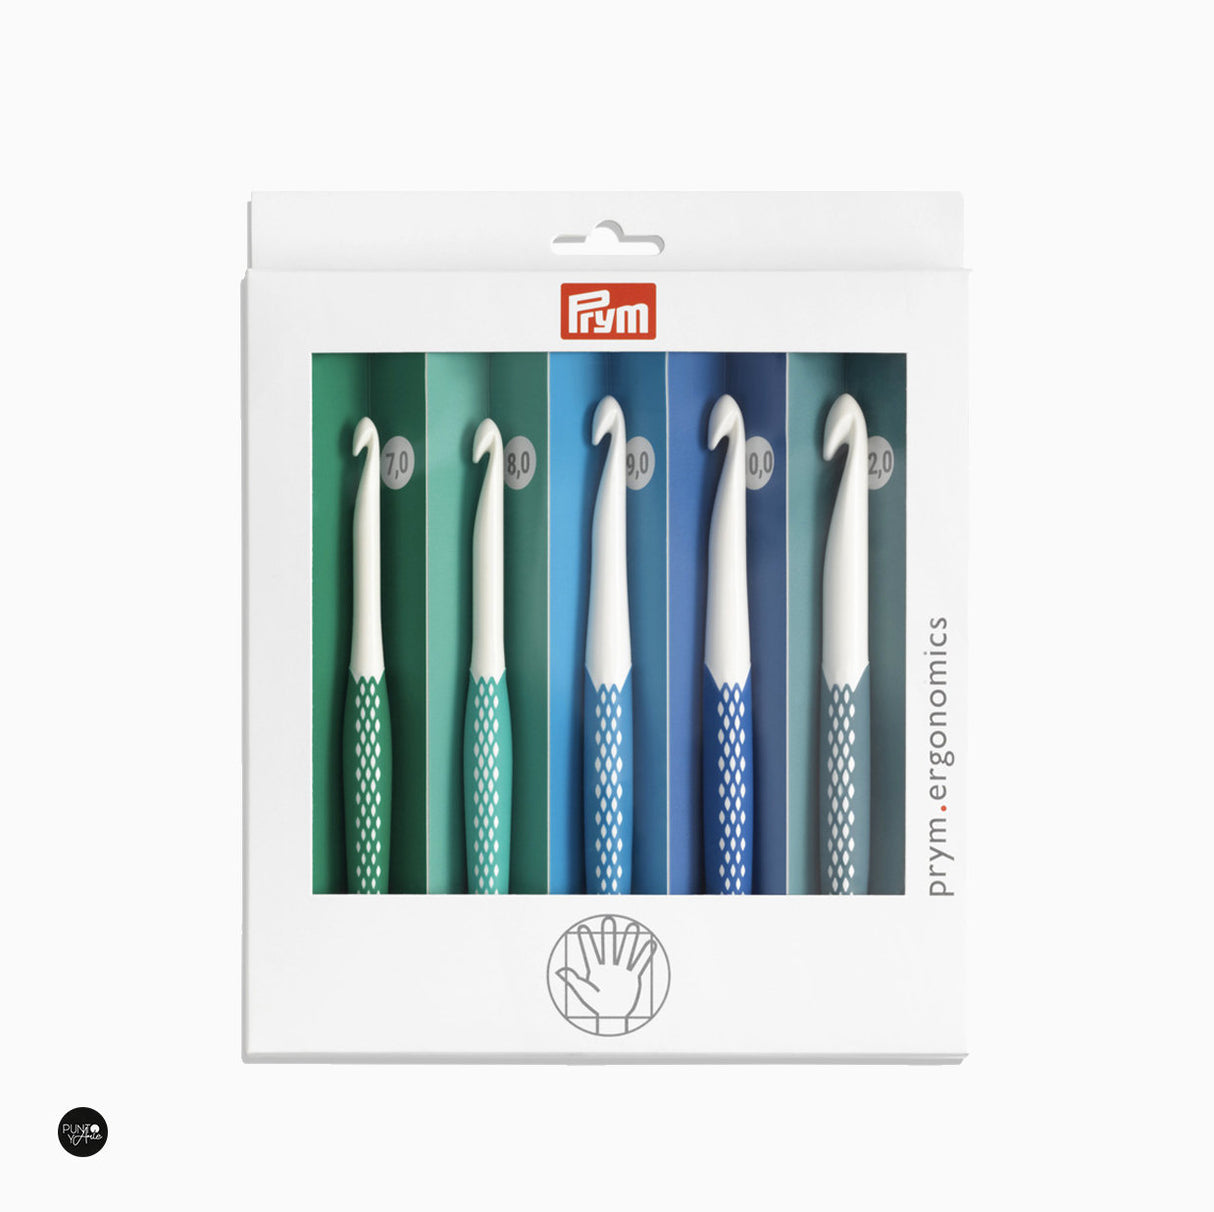 Prym Ergonomic Crochet Hooks Set - Colored Crochet Hooks with Silicone Handles, Two Sizes Available